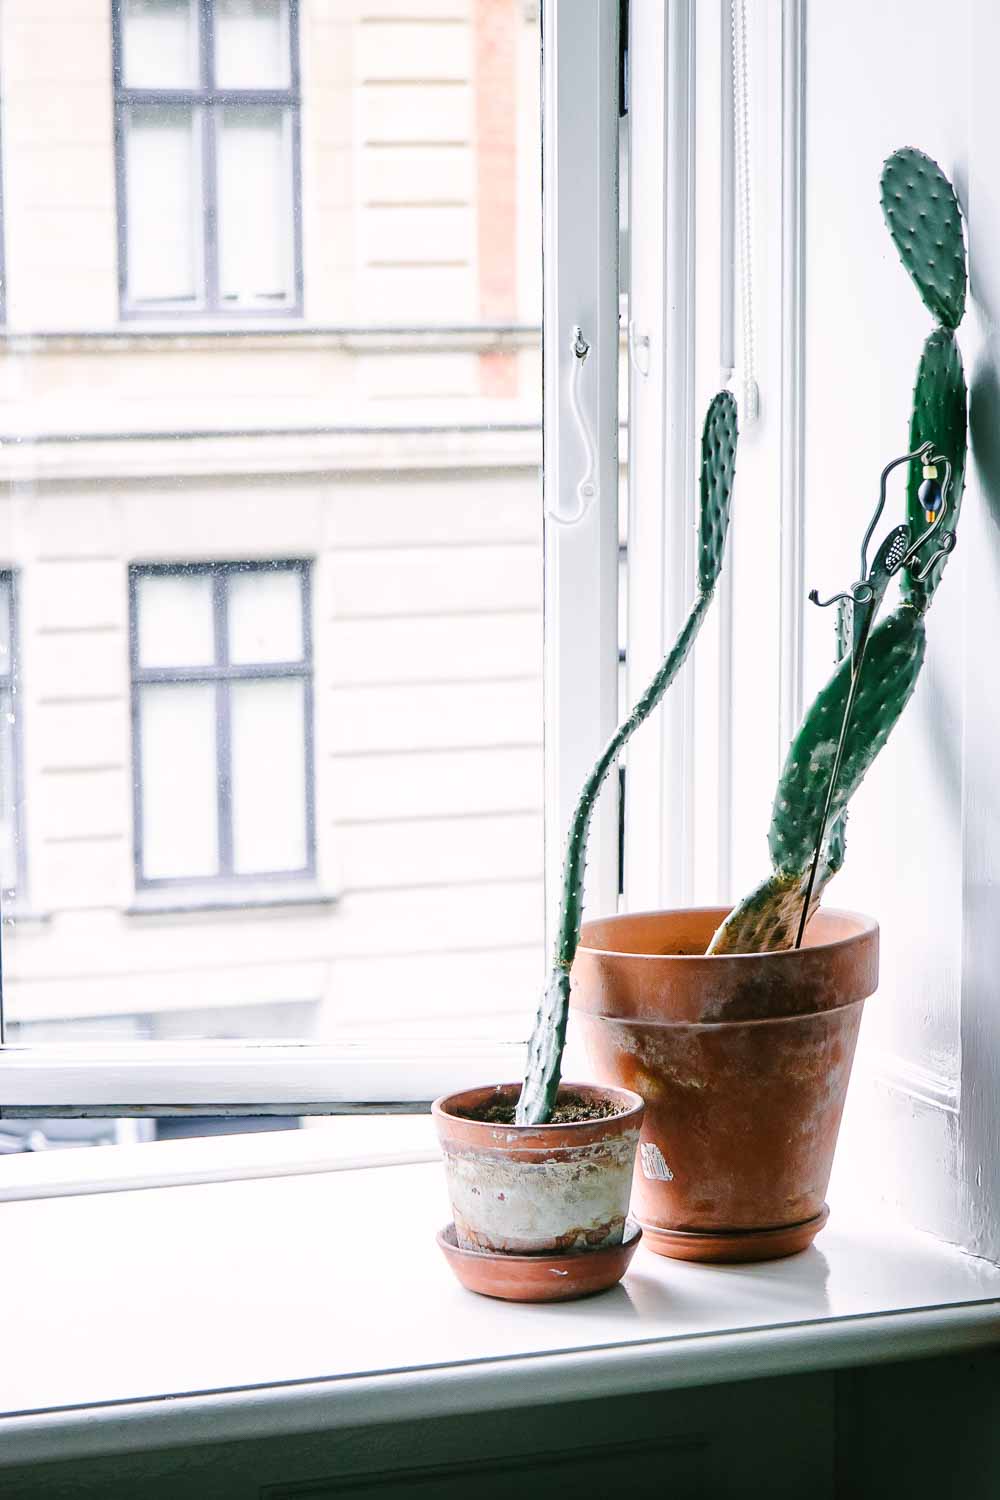 a photo of two plants on a kitchen windowsill